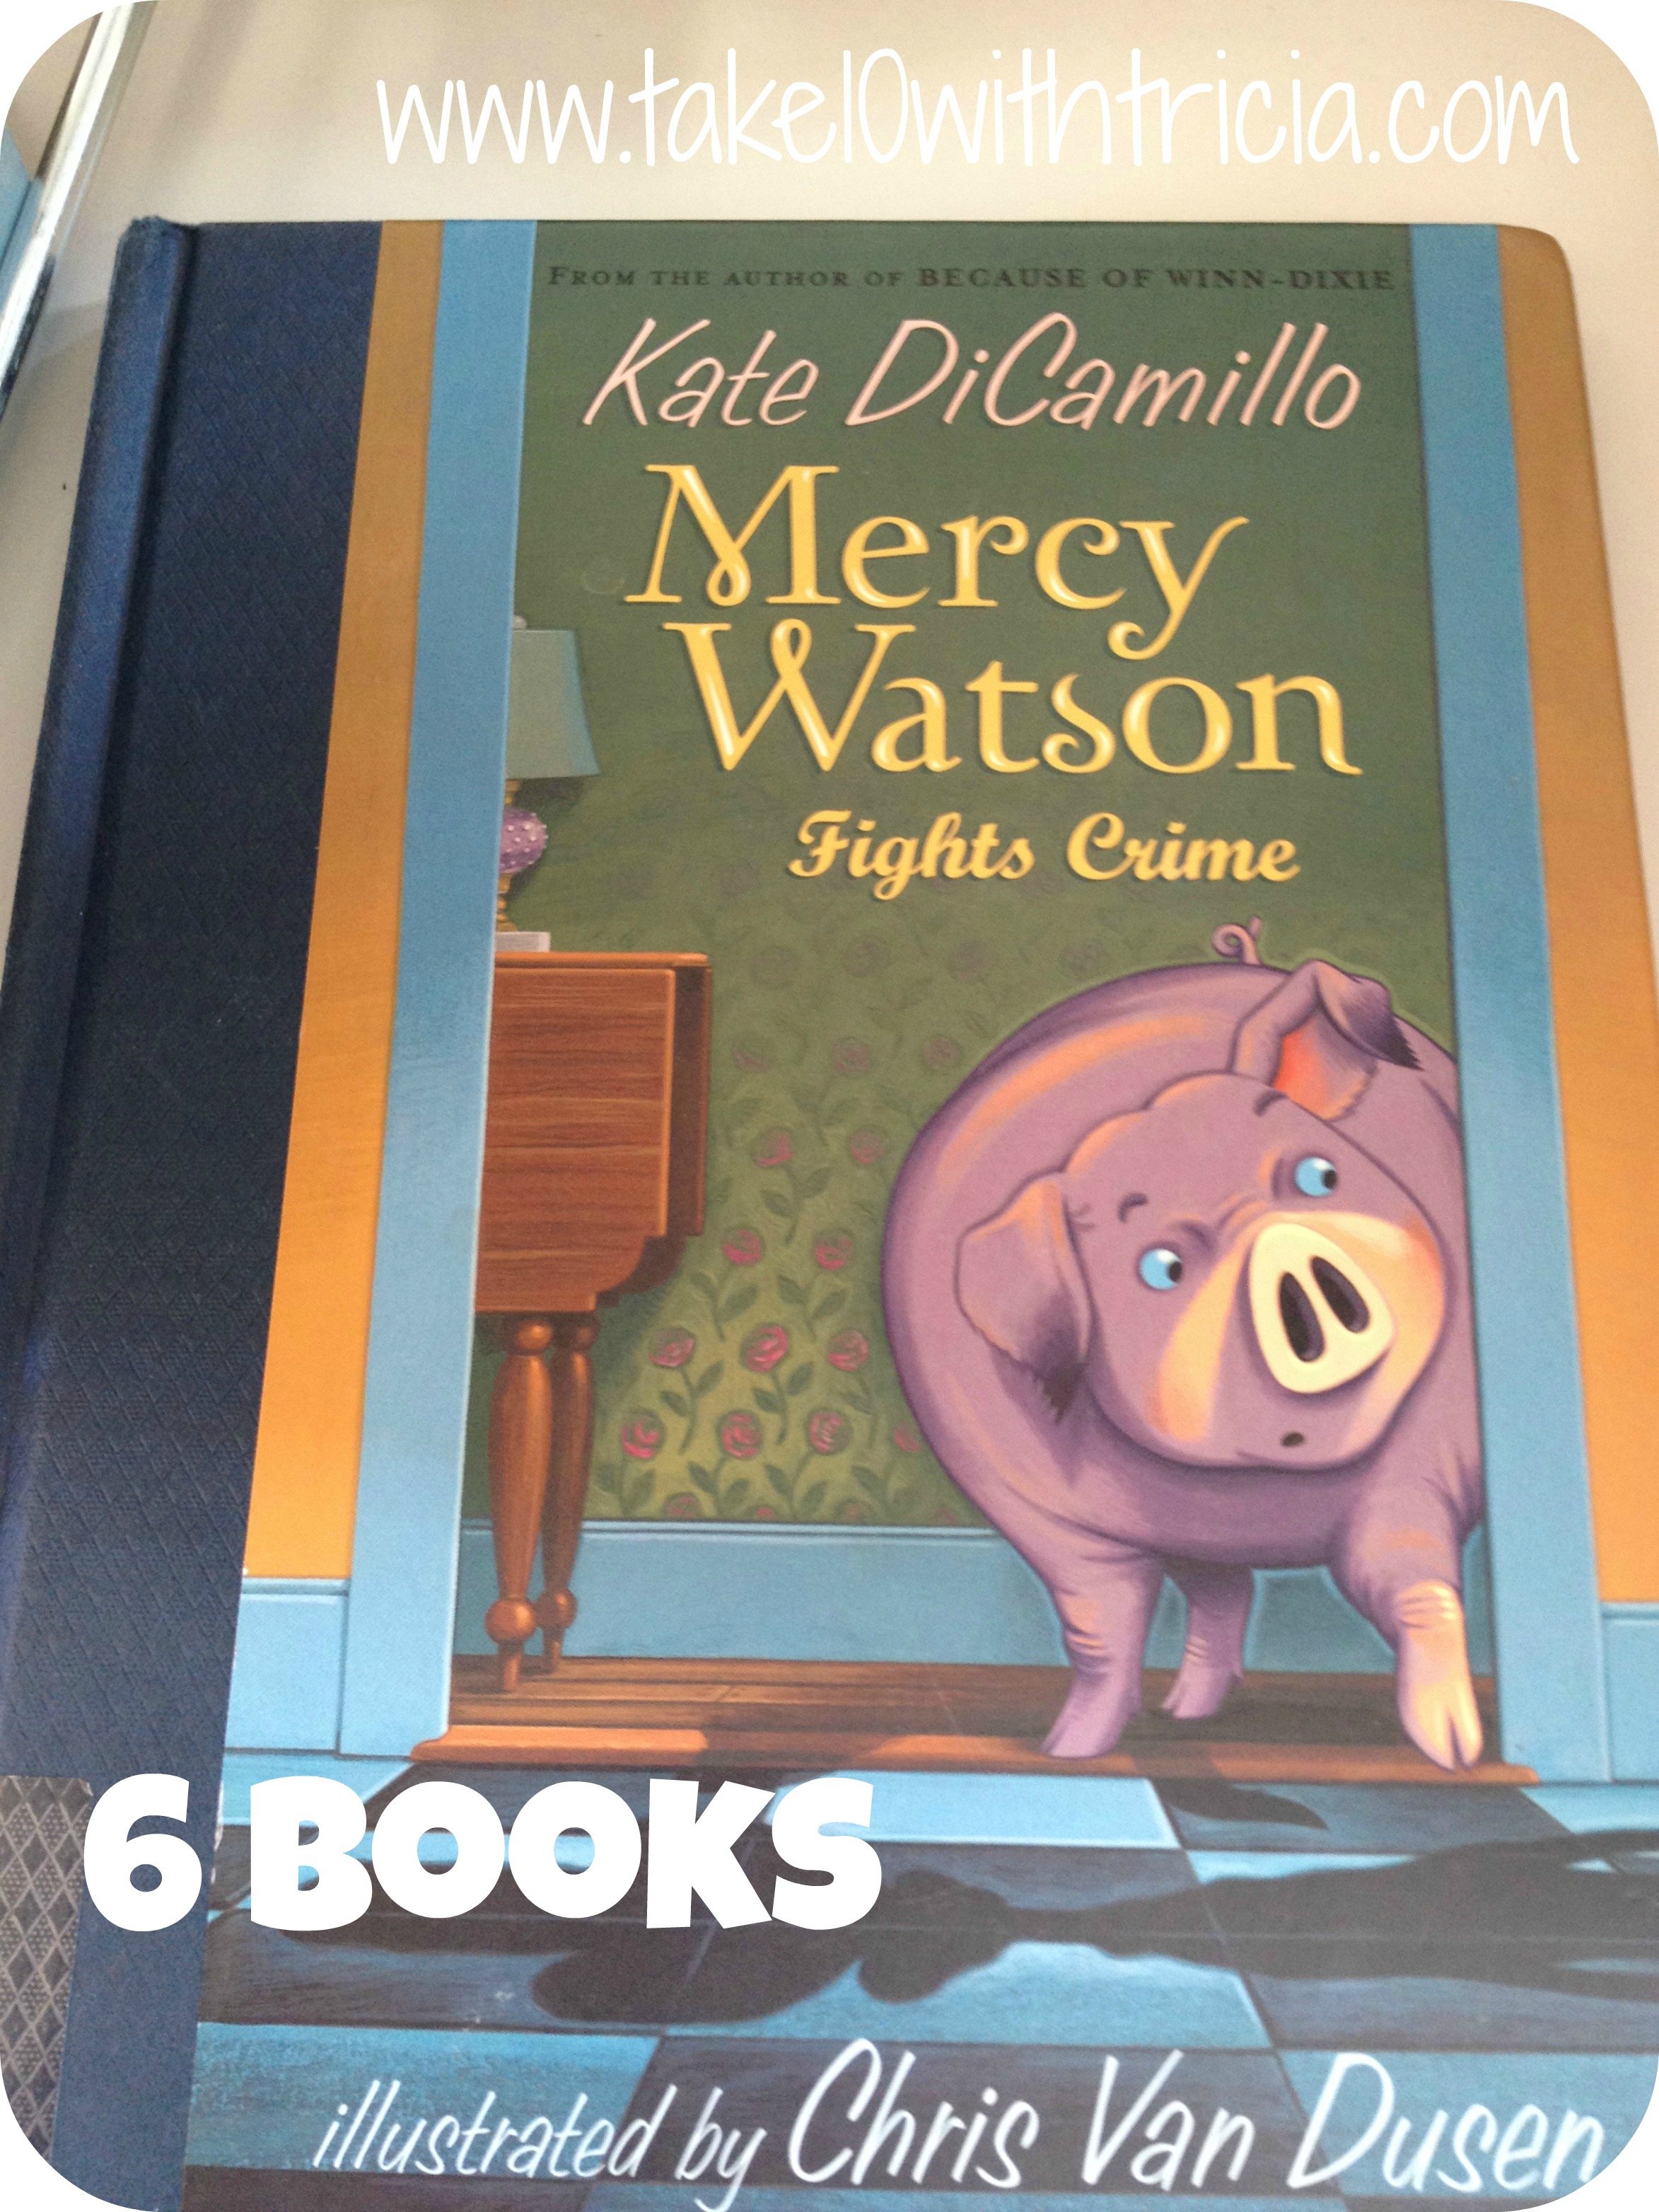 Books Stella Loves – Chapter Books for Early Readers | Take 10 With Tricia